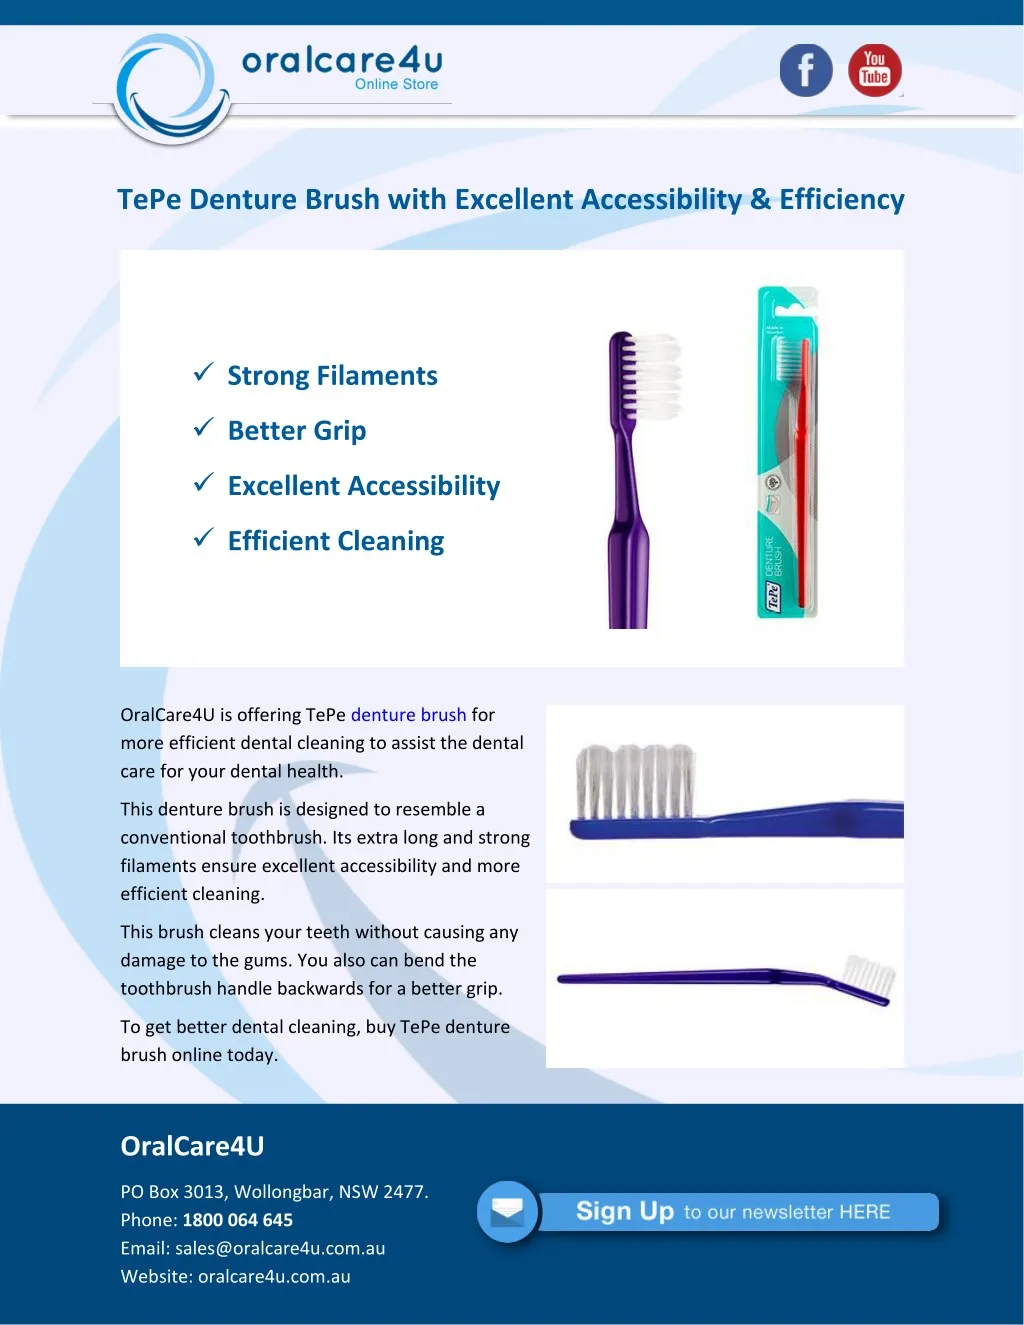 tepe denture brush with excellent accessibility